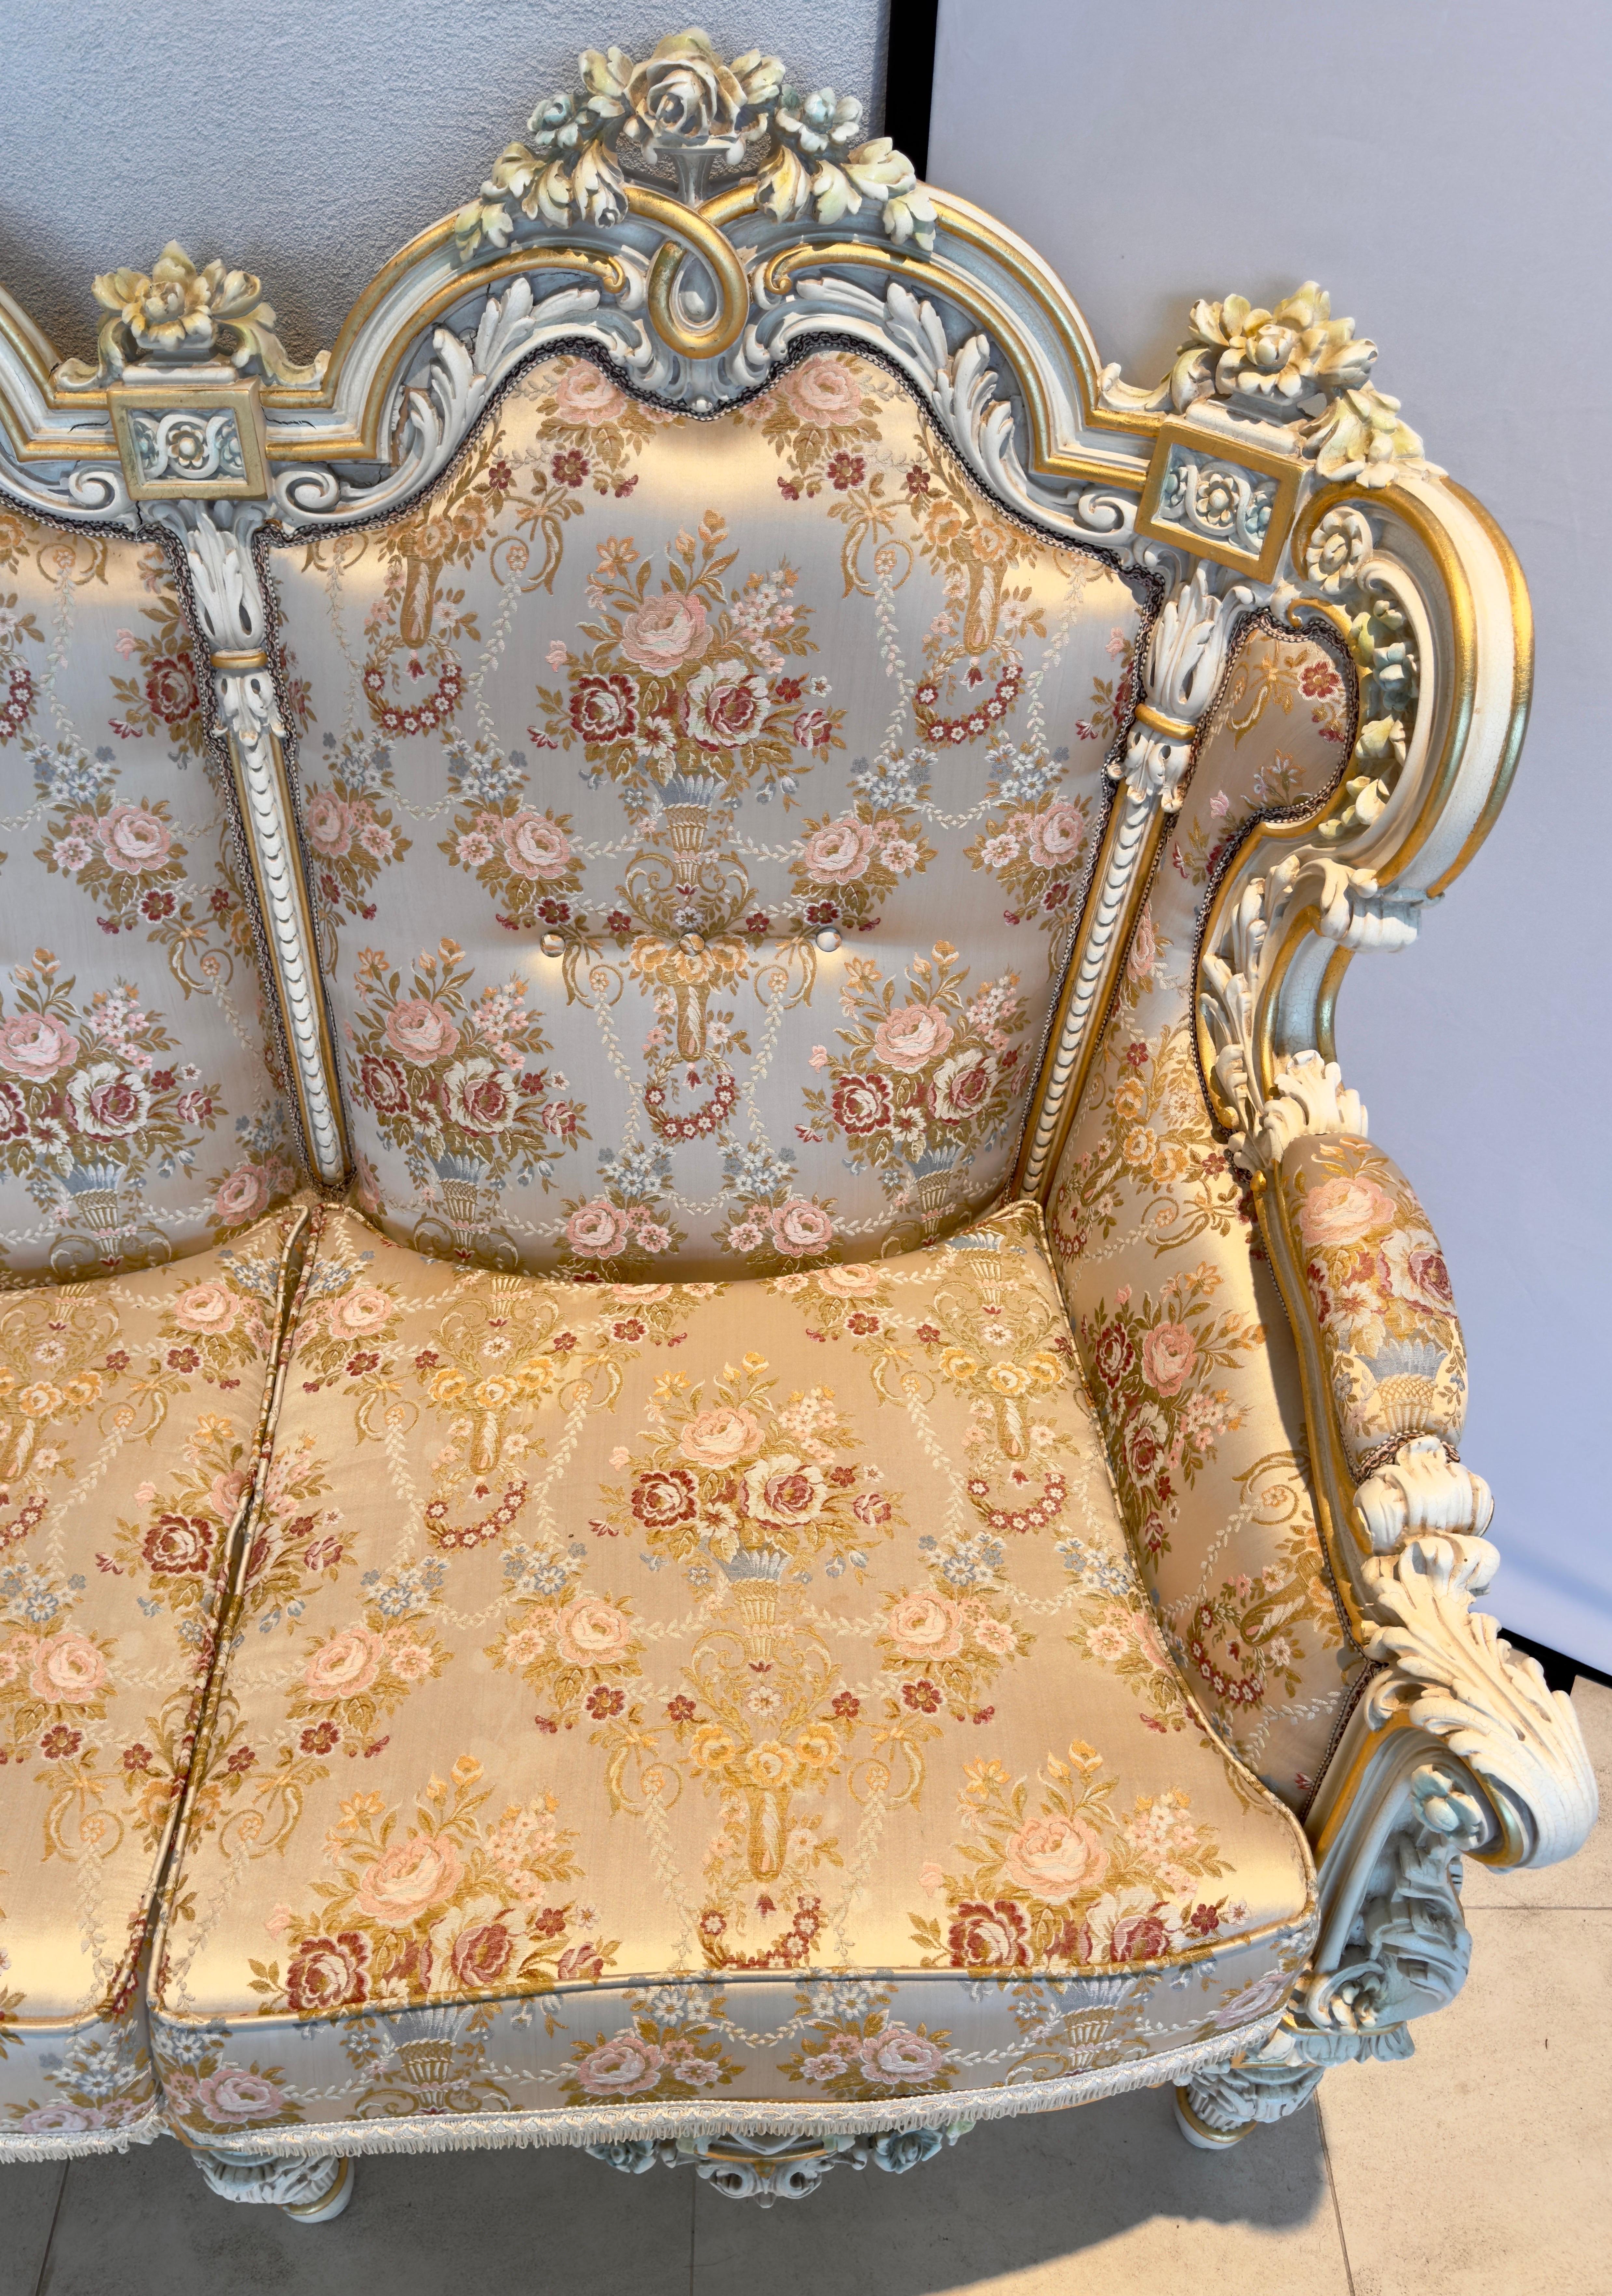 Italian Neoclassical Baroque Style Sofa with fine floral silk upholstery  For Sale 7